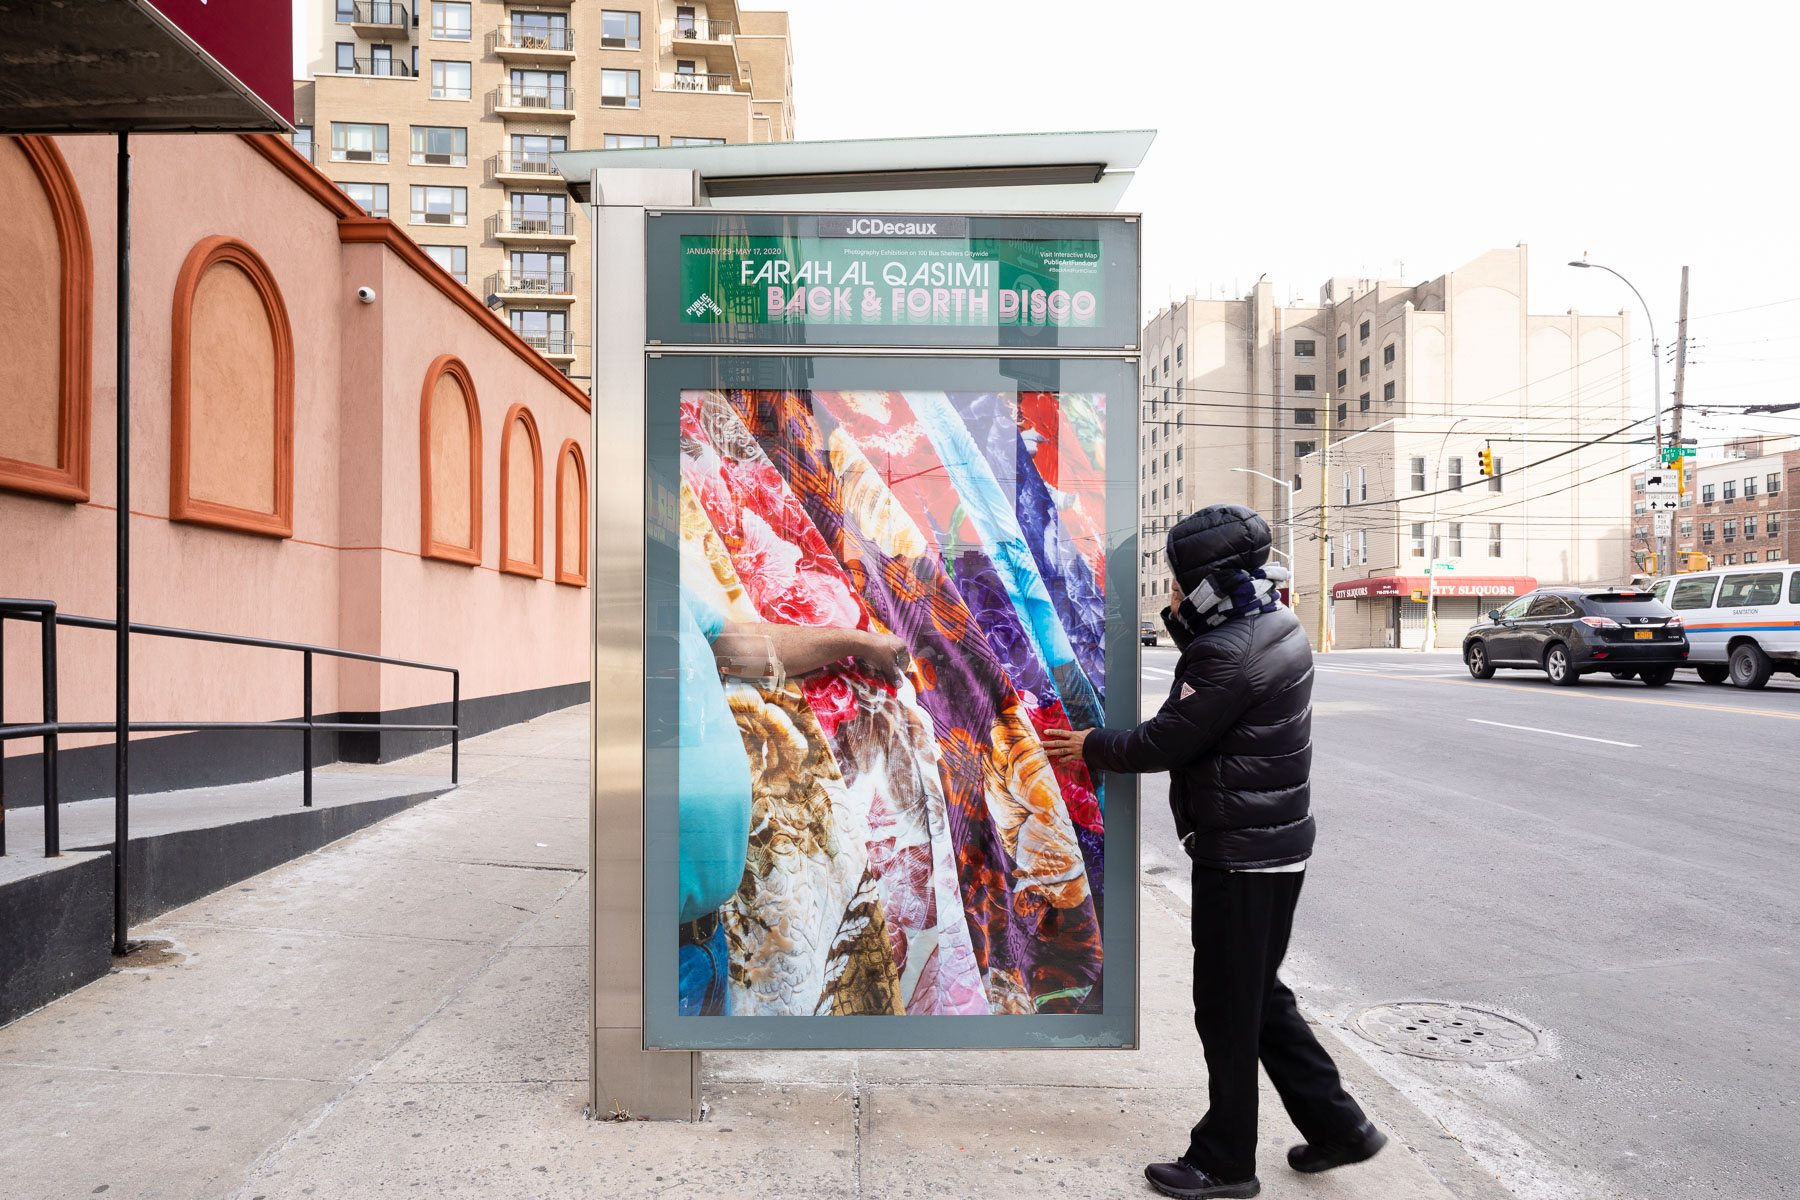 Farah Al Qasimi, “Blanket Shop” (2019). Photo: James Ewing, Courtesy of Public Art Fund, NY.  Photographic work as a part of Back and Forth Disco, presented by Public Art Fund on 100 JCDecaux bus shelters citywide, January 29 – May 17, 2020